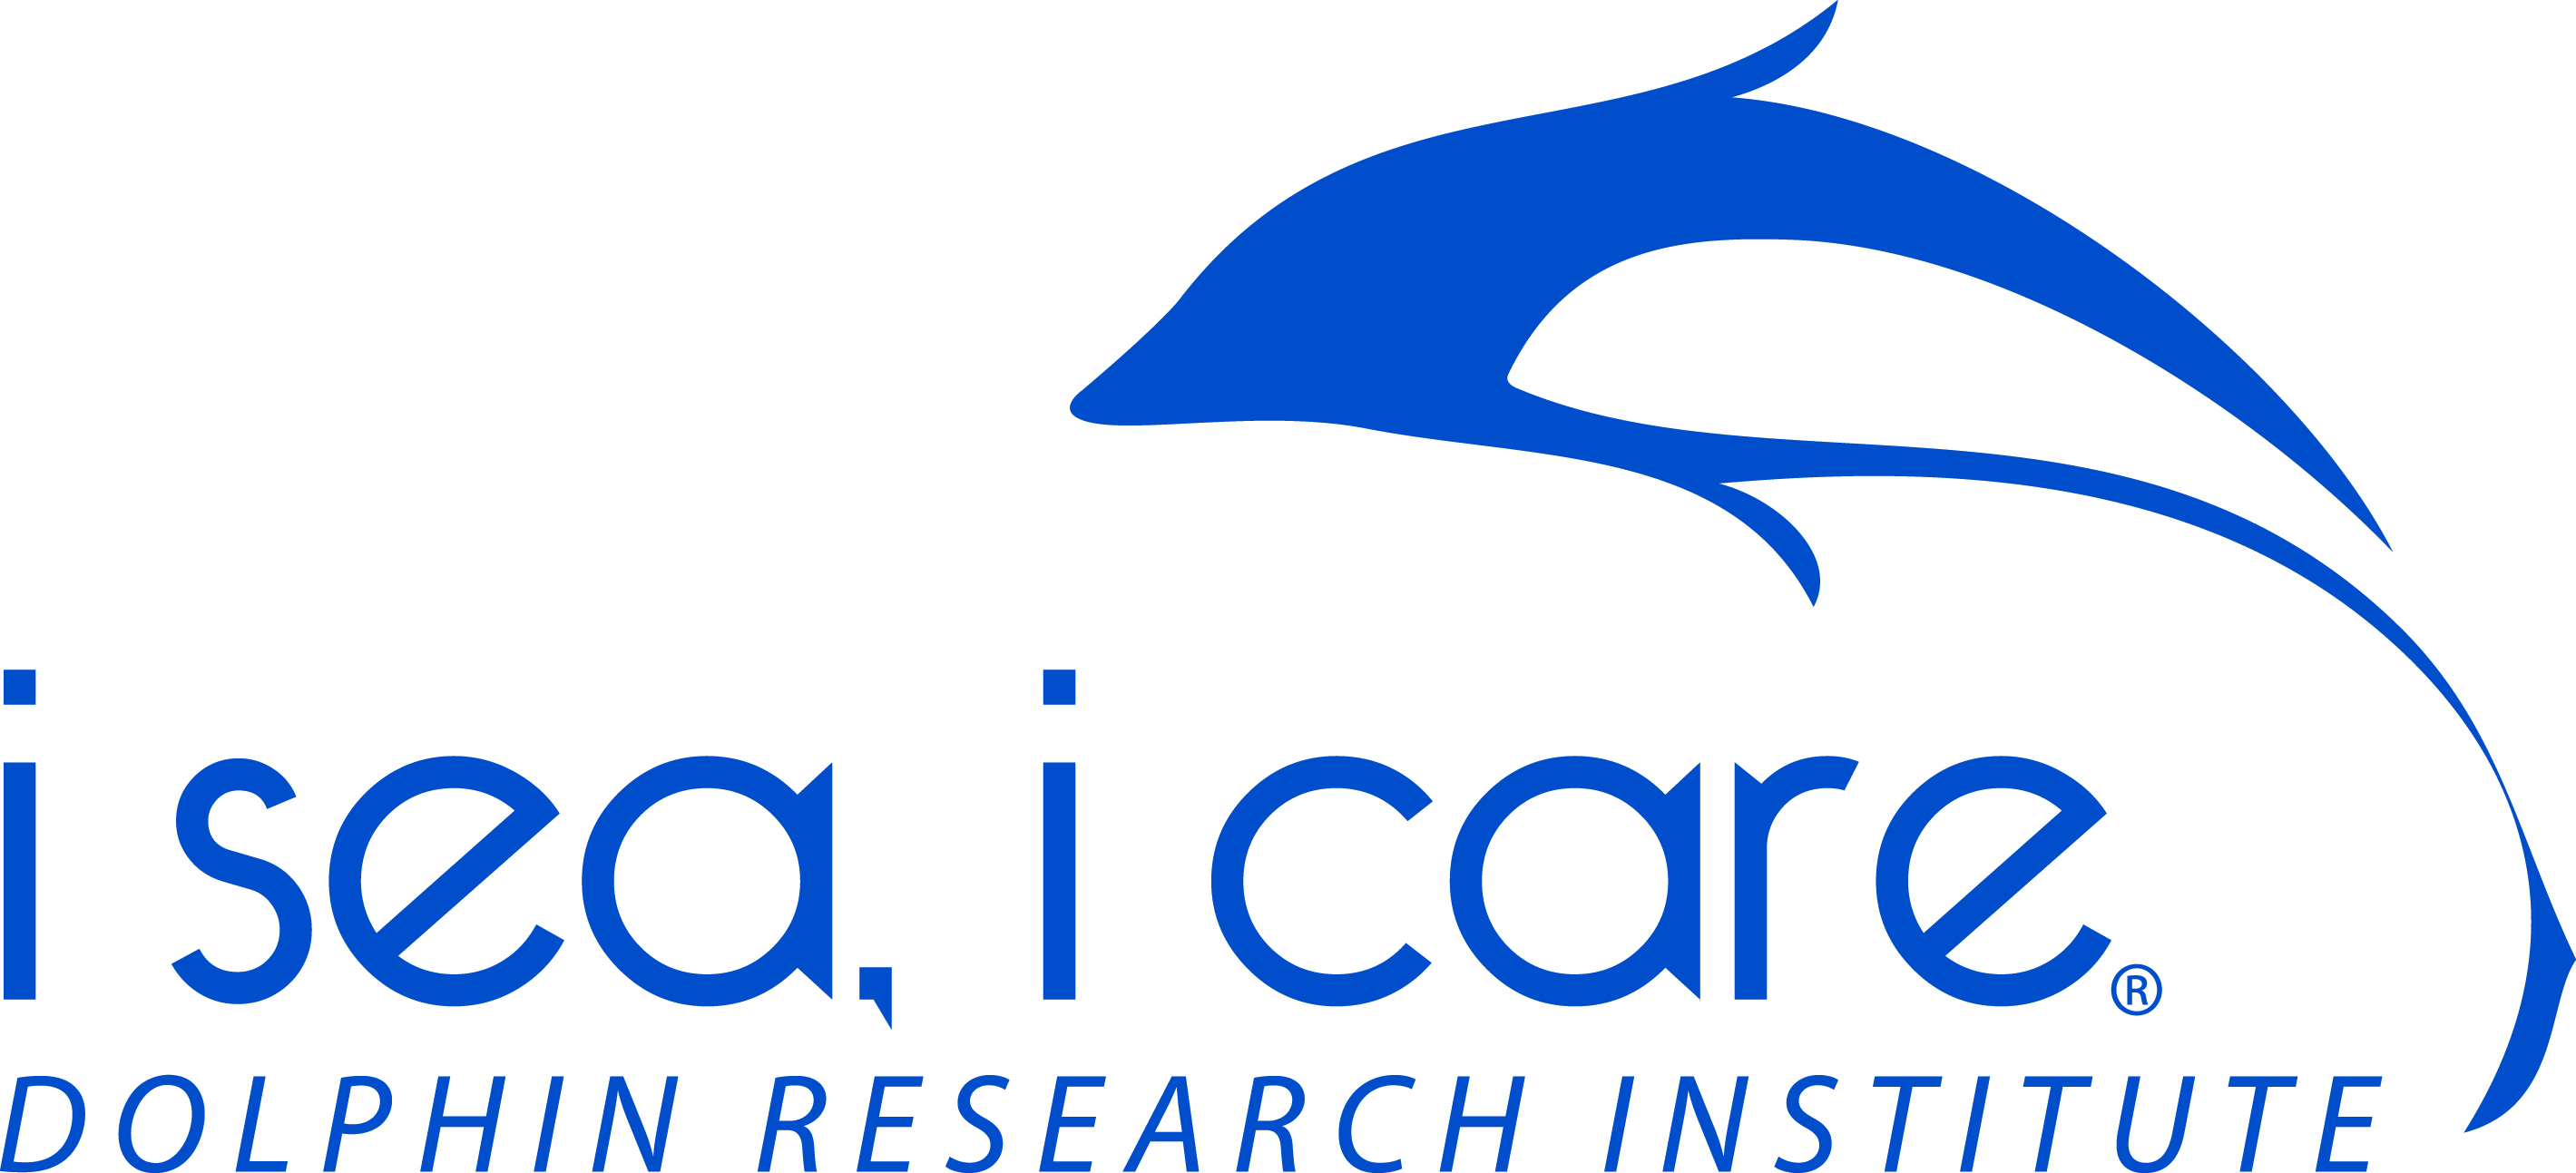 Group logo of Dolphin Research Institute